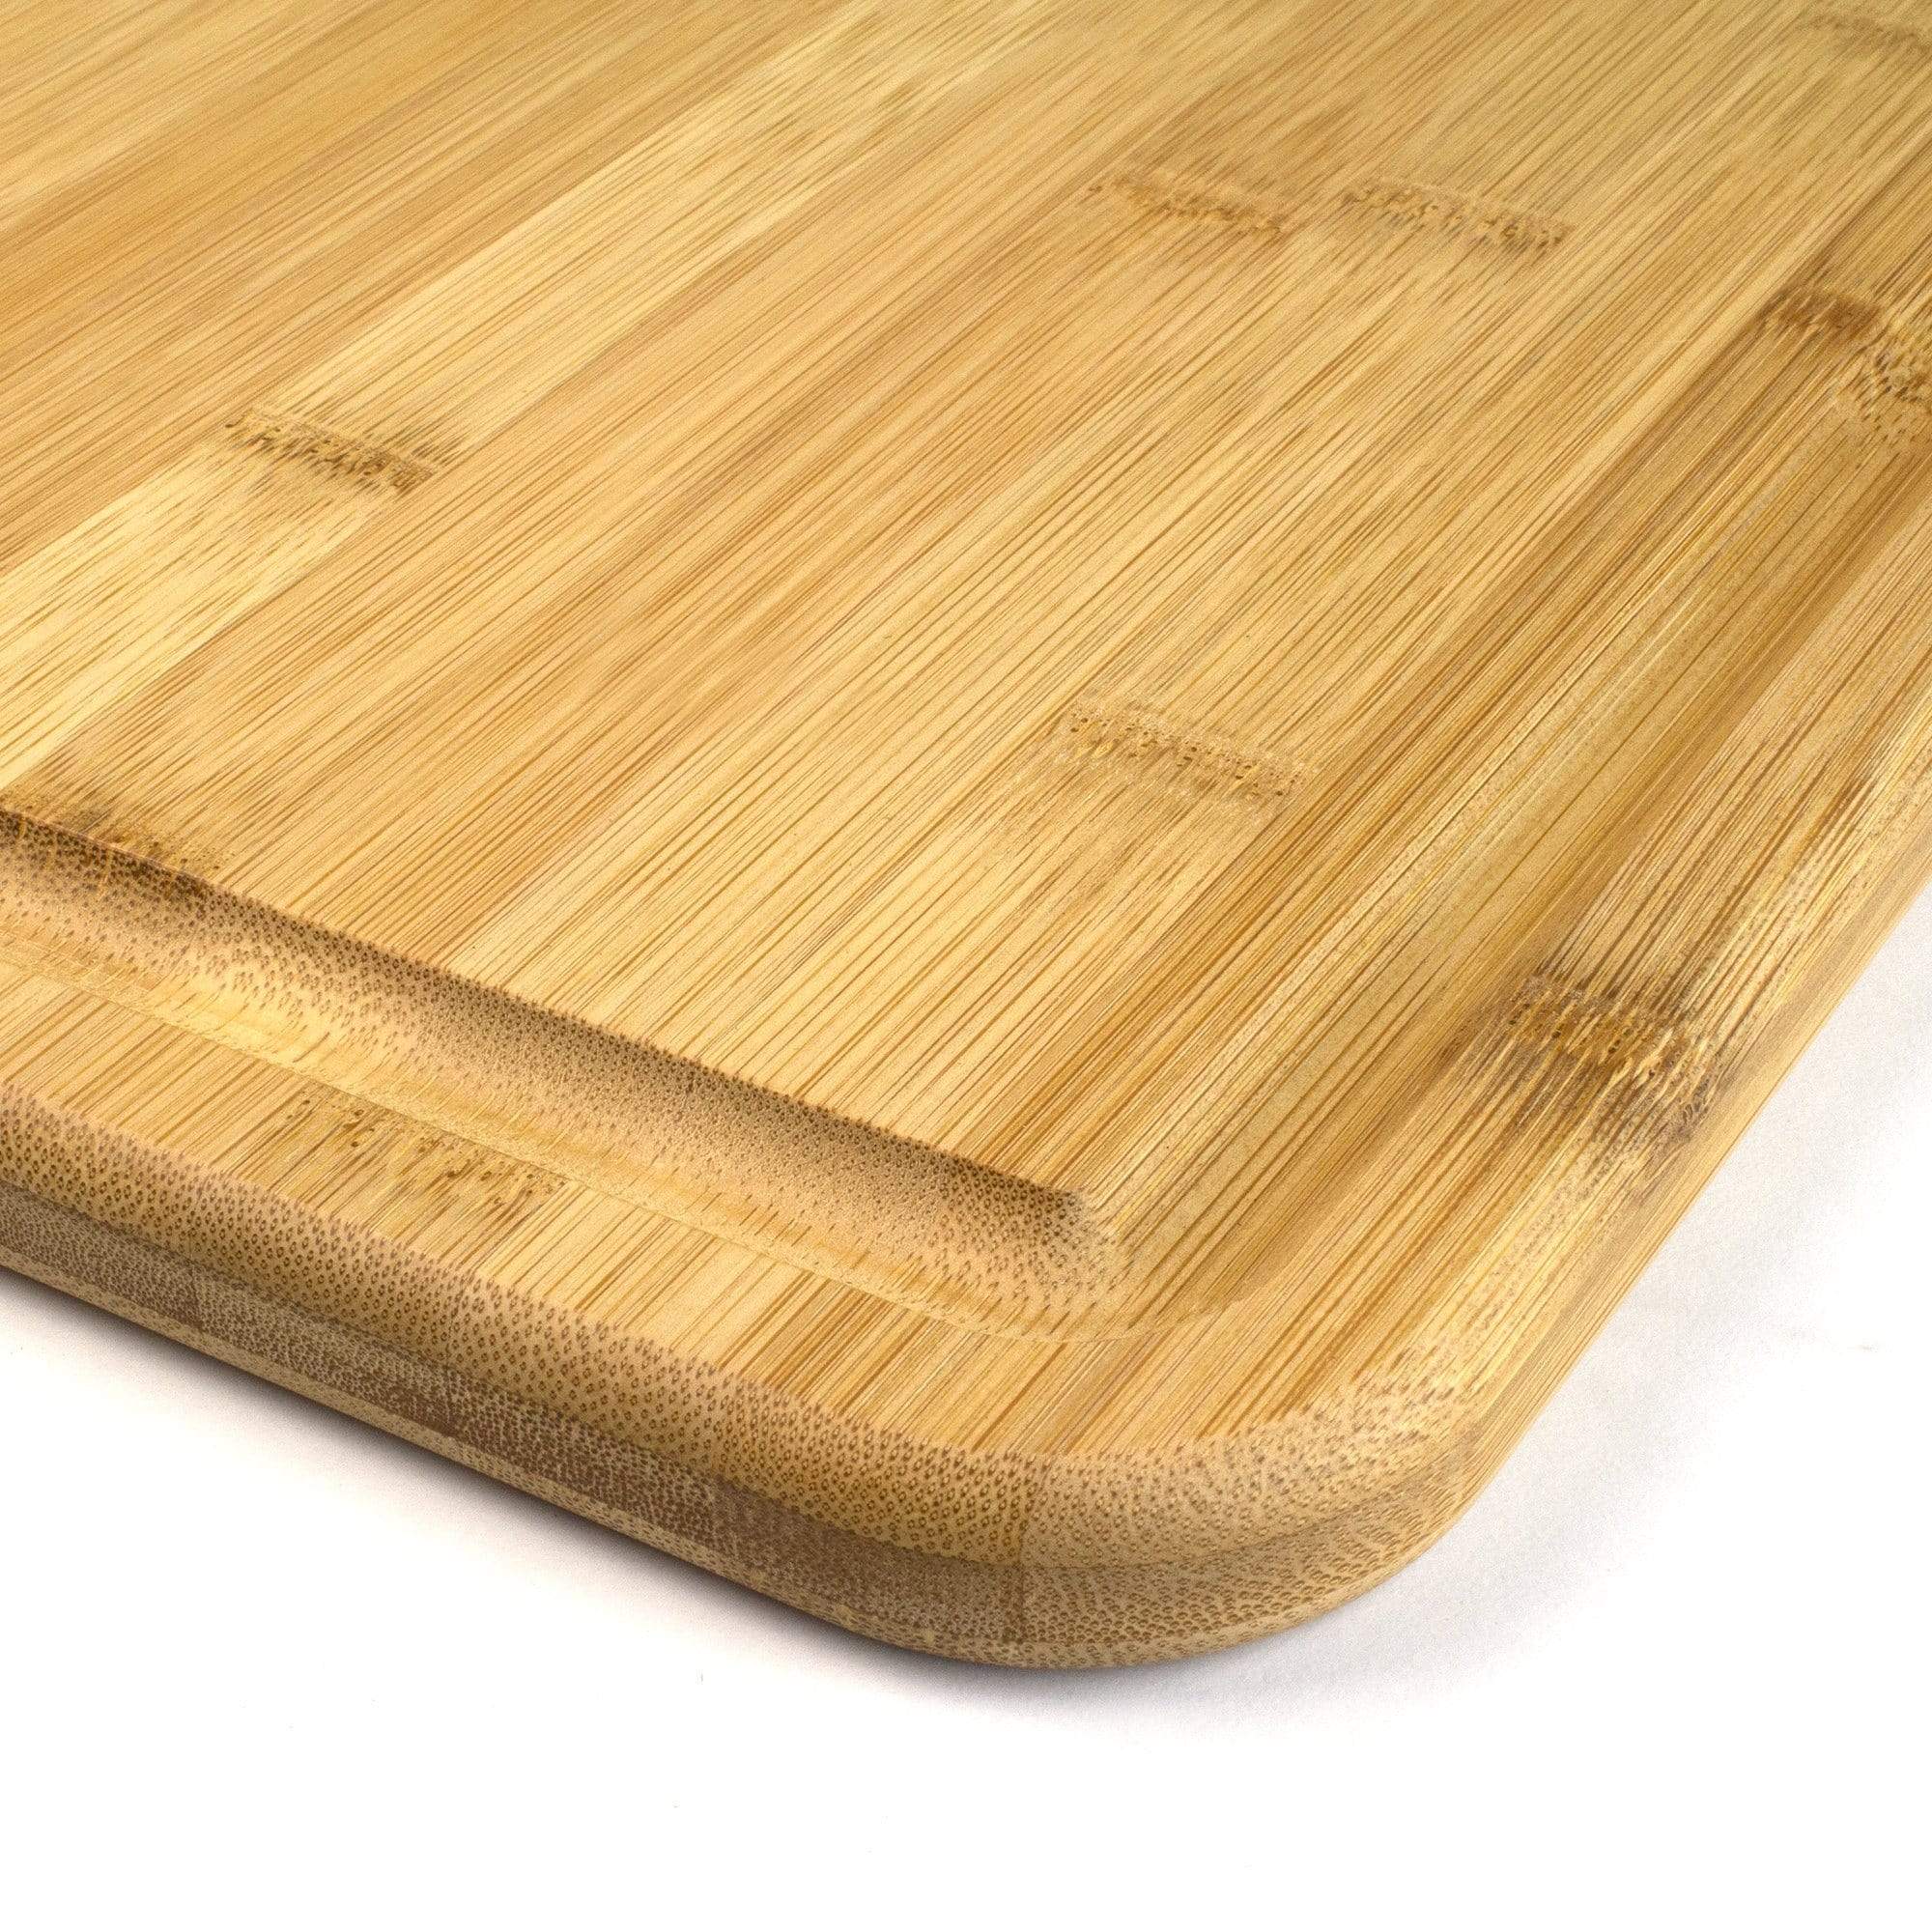 https://totallybamboo.com/cdn/shop/products/totally-bamboo-3-well-kitchen-prep-cutting-board-with-juice-groove-17-12-x-13-12-totally-bamboo-521128.jpg?v=1627836481